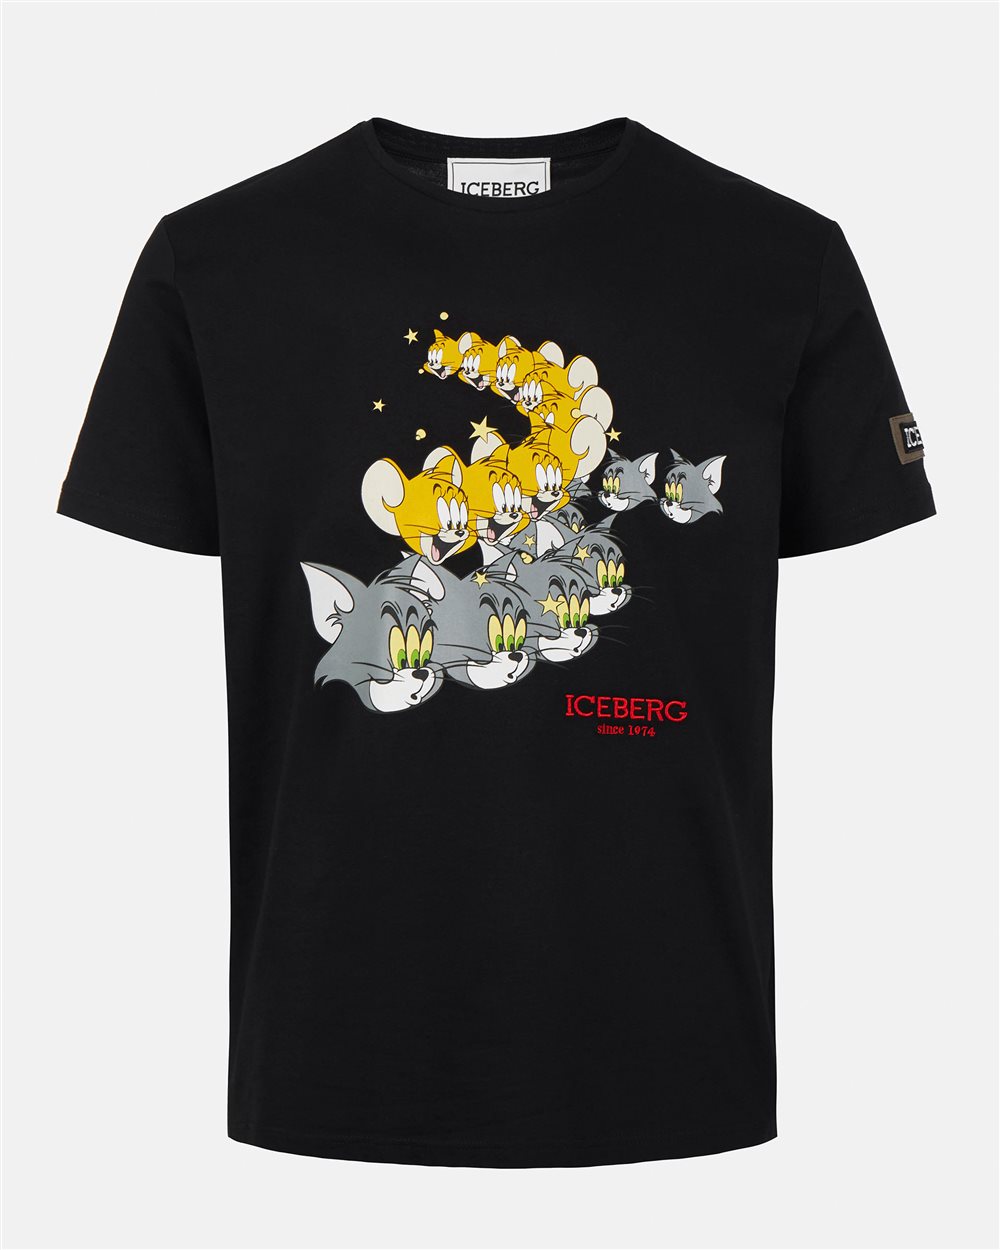 Black T-shirt with cartoon graphics - Iceberg - Official Website